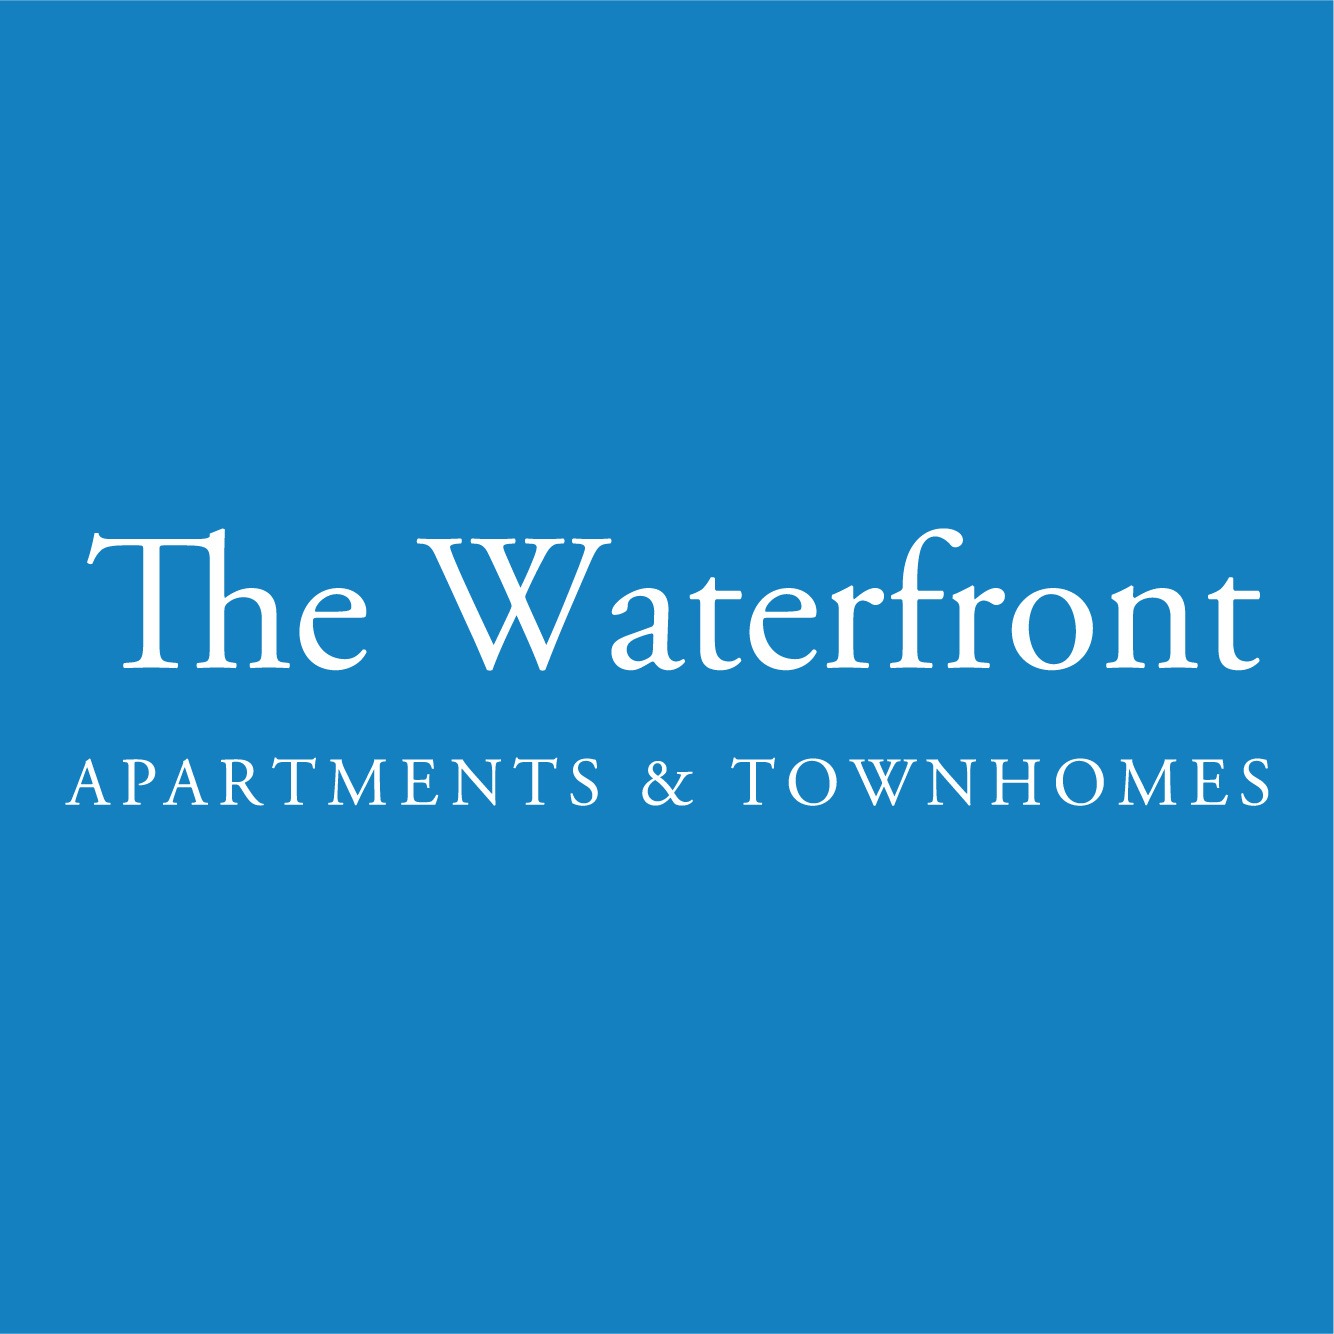 The Waterfront Apartments & Townhomes